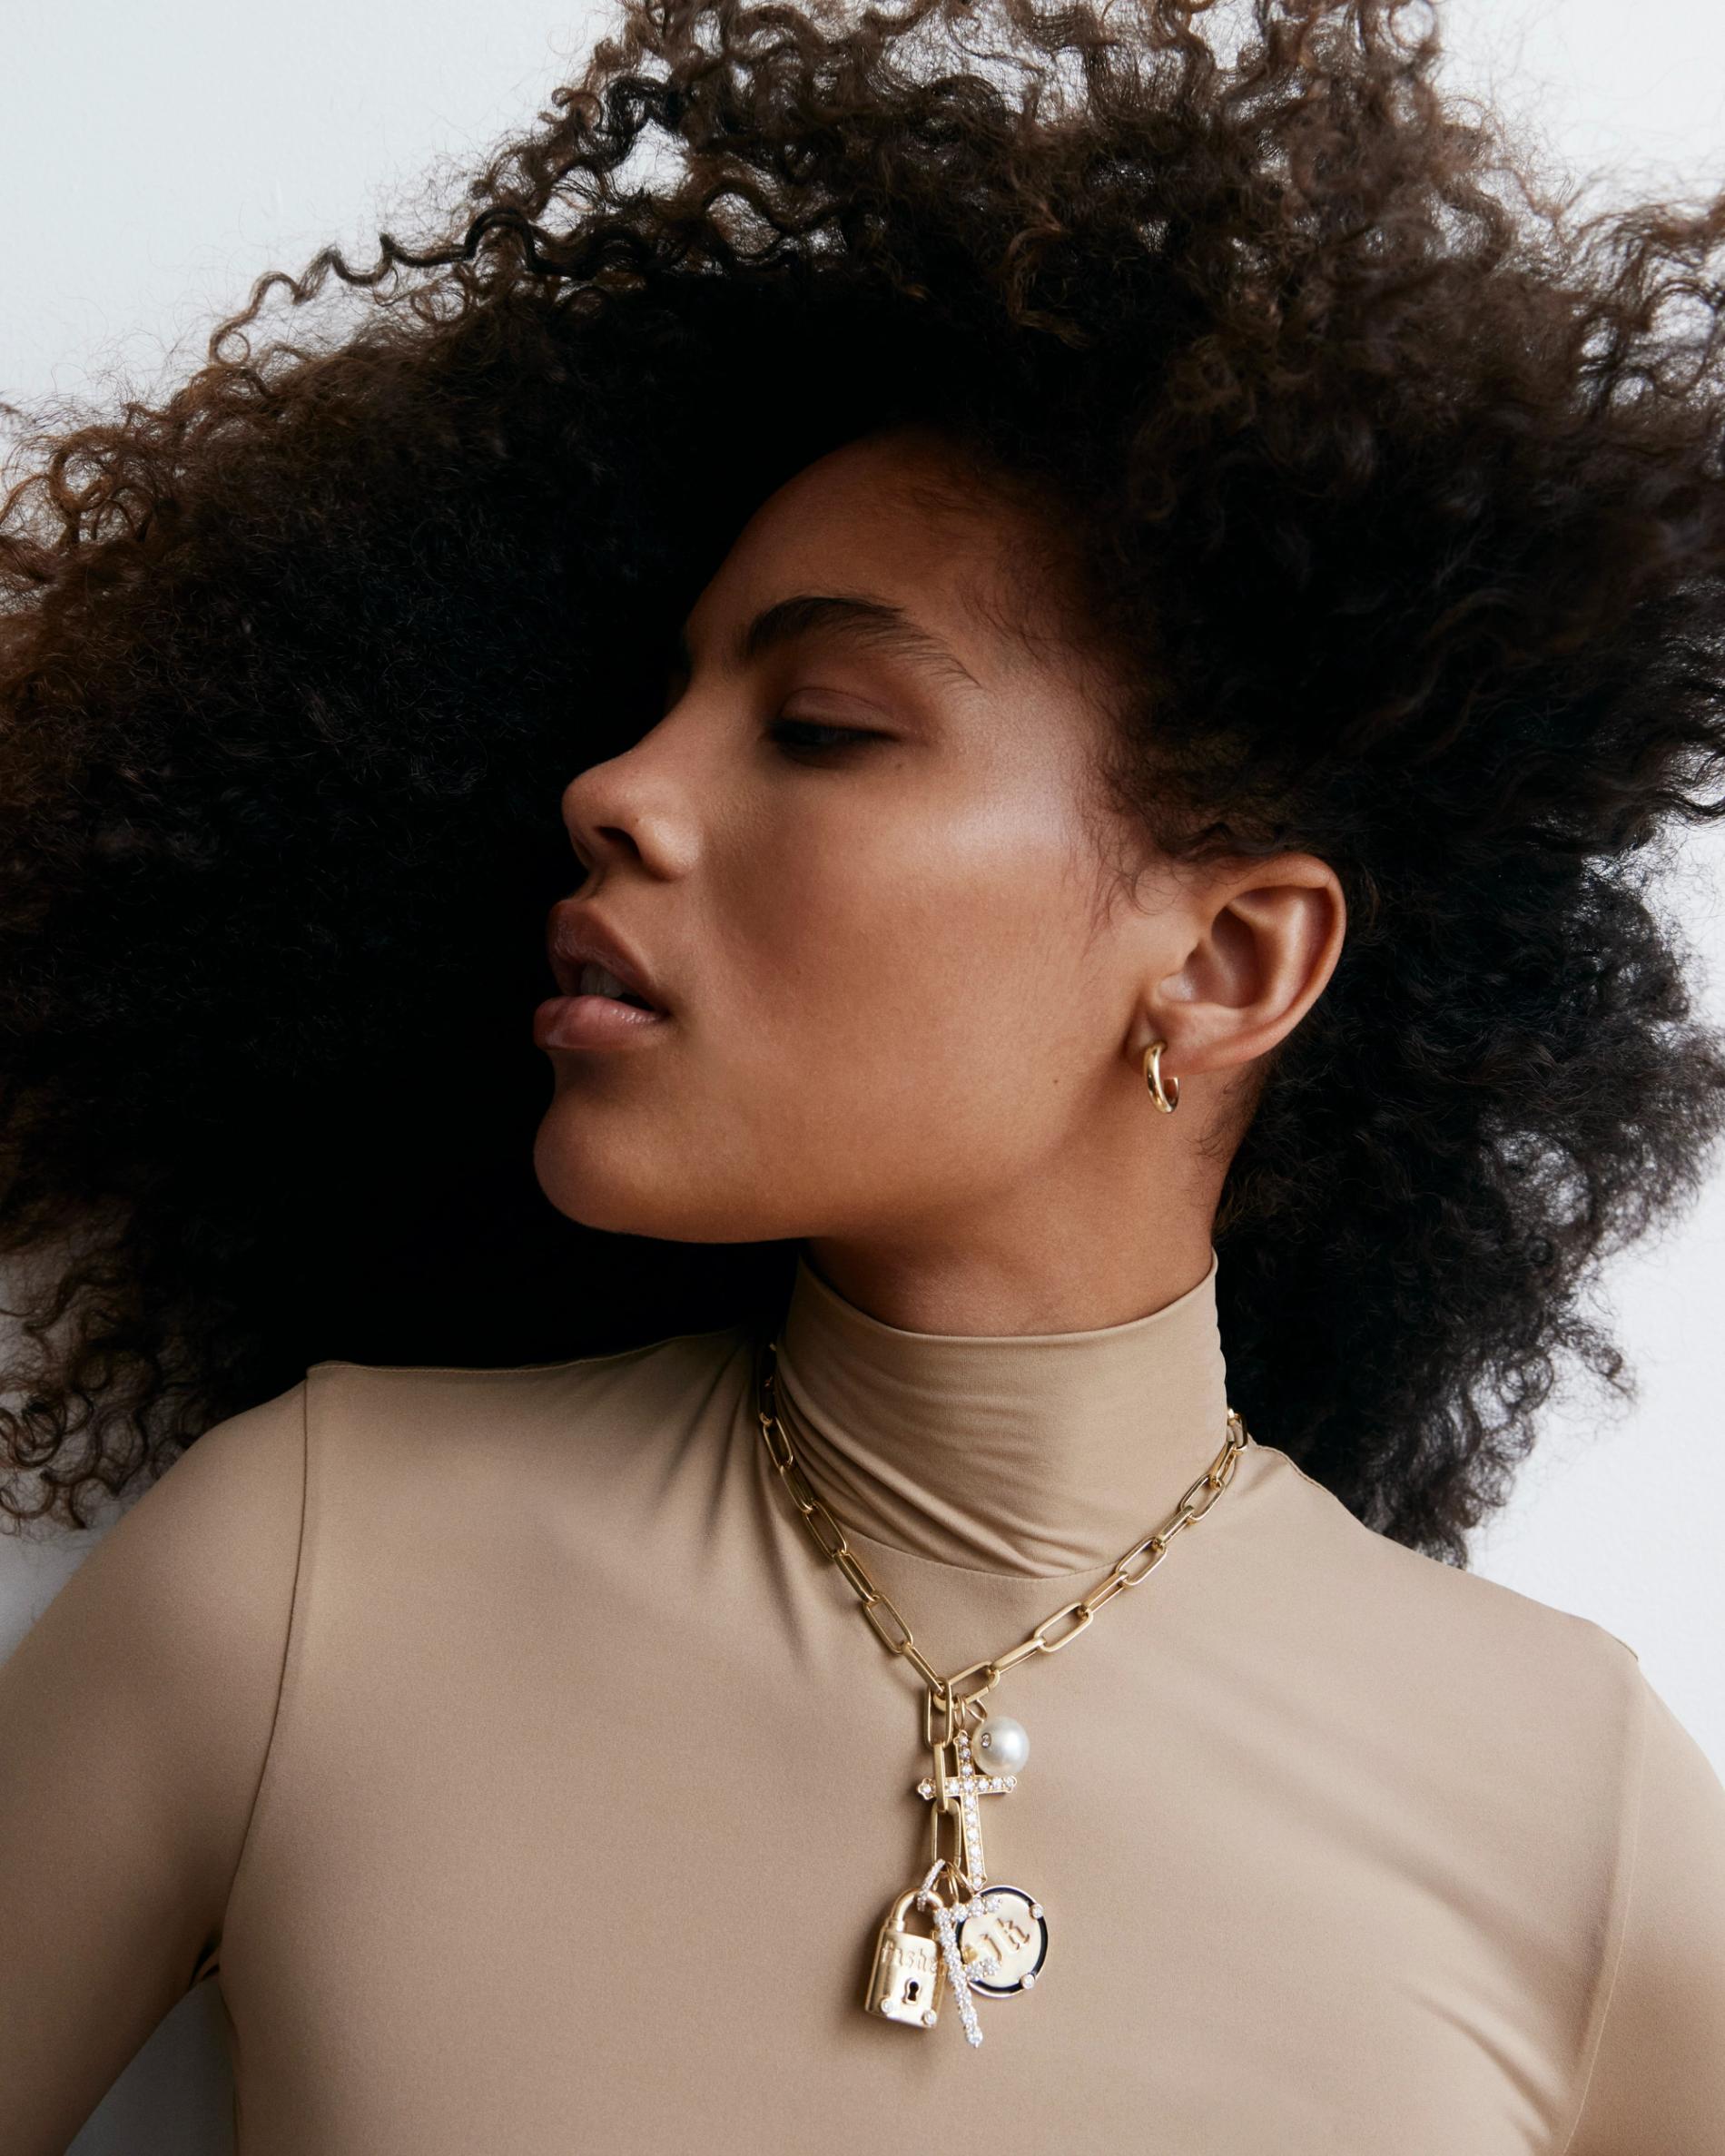 Model wearing beige turtleneck and multiple large gold and diamond charms on a chunky gold necklace 